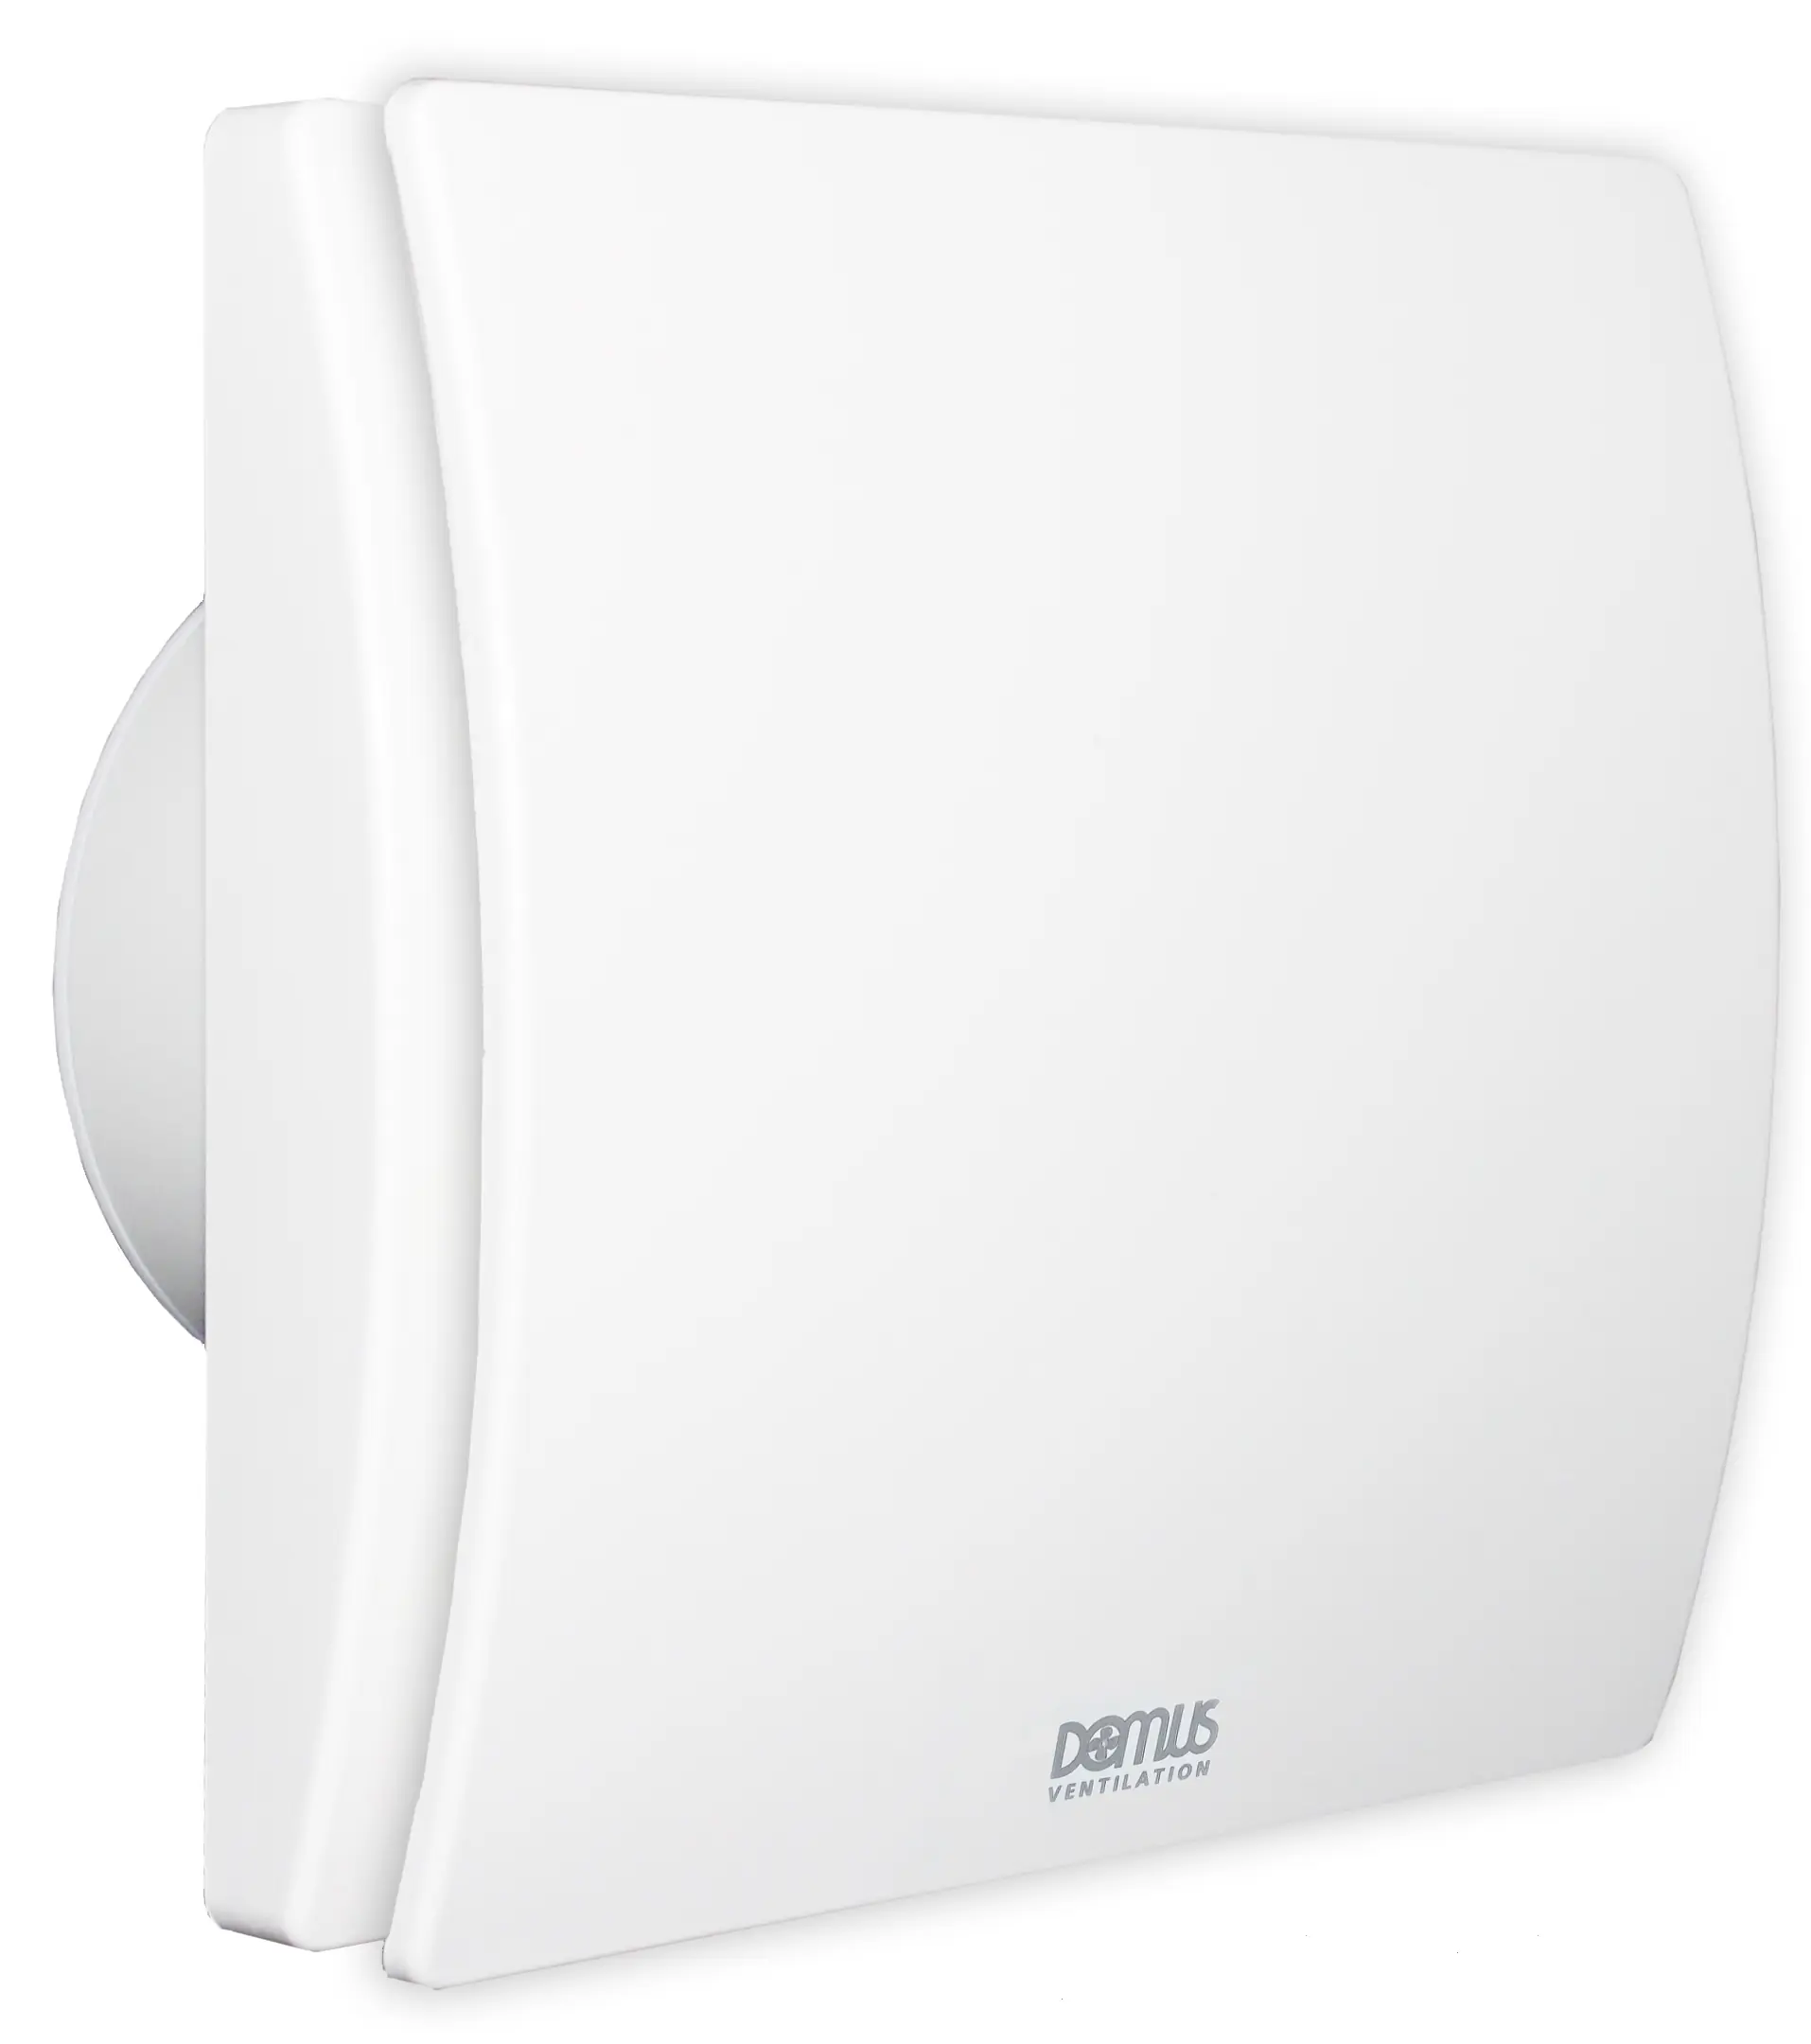 Welcoming the newest addition to the Domus Ventilation range the dMEV-NICO